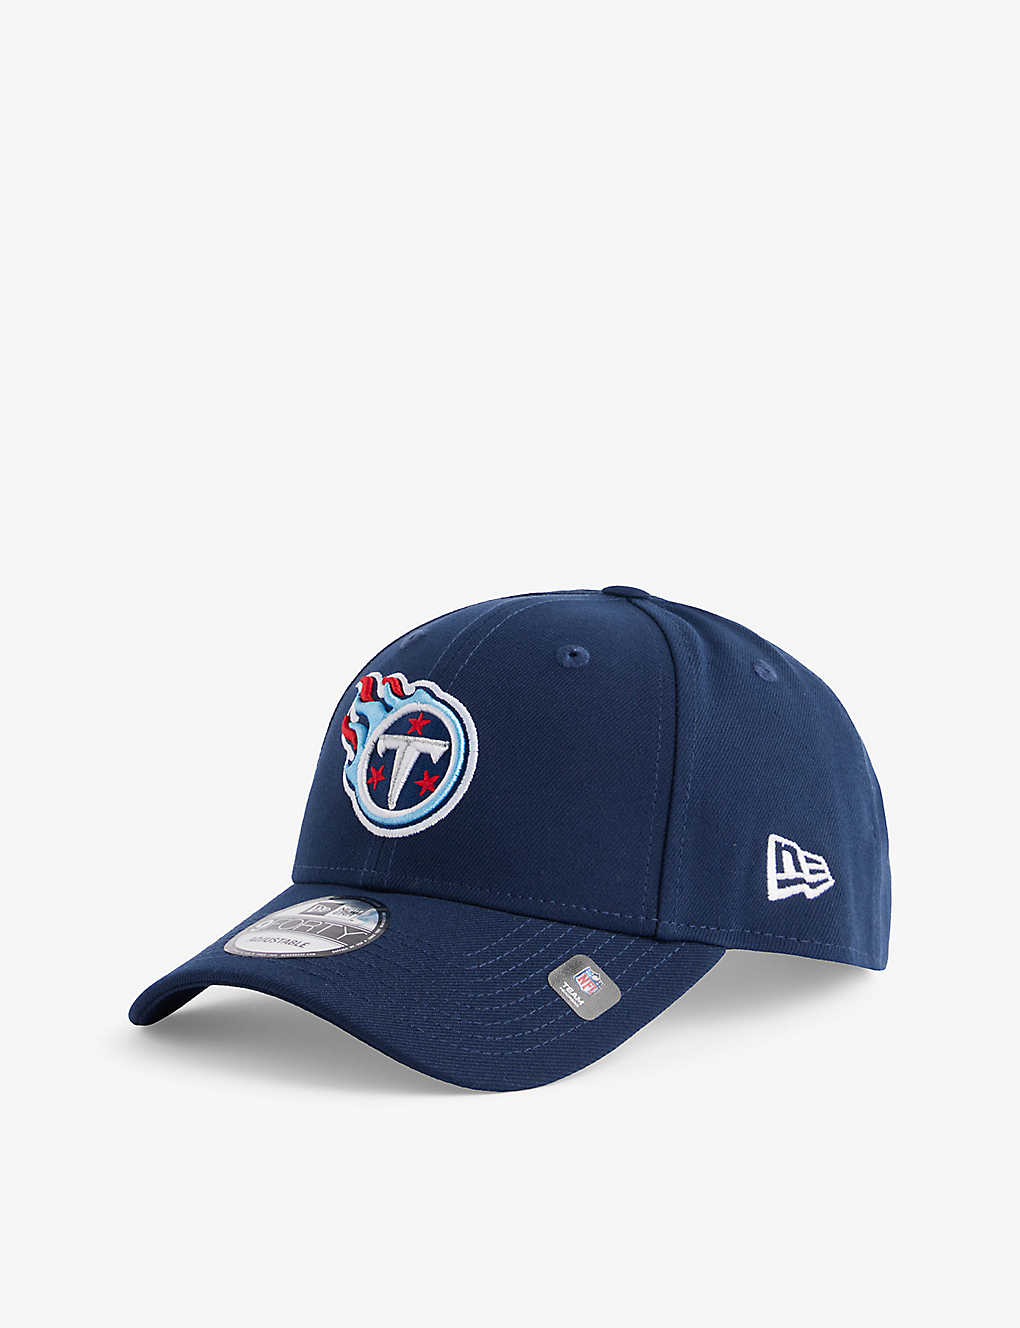 New Era Mens Navy Tennessee Titans Nfl Brand-embroidered Woven Cap